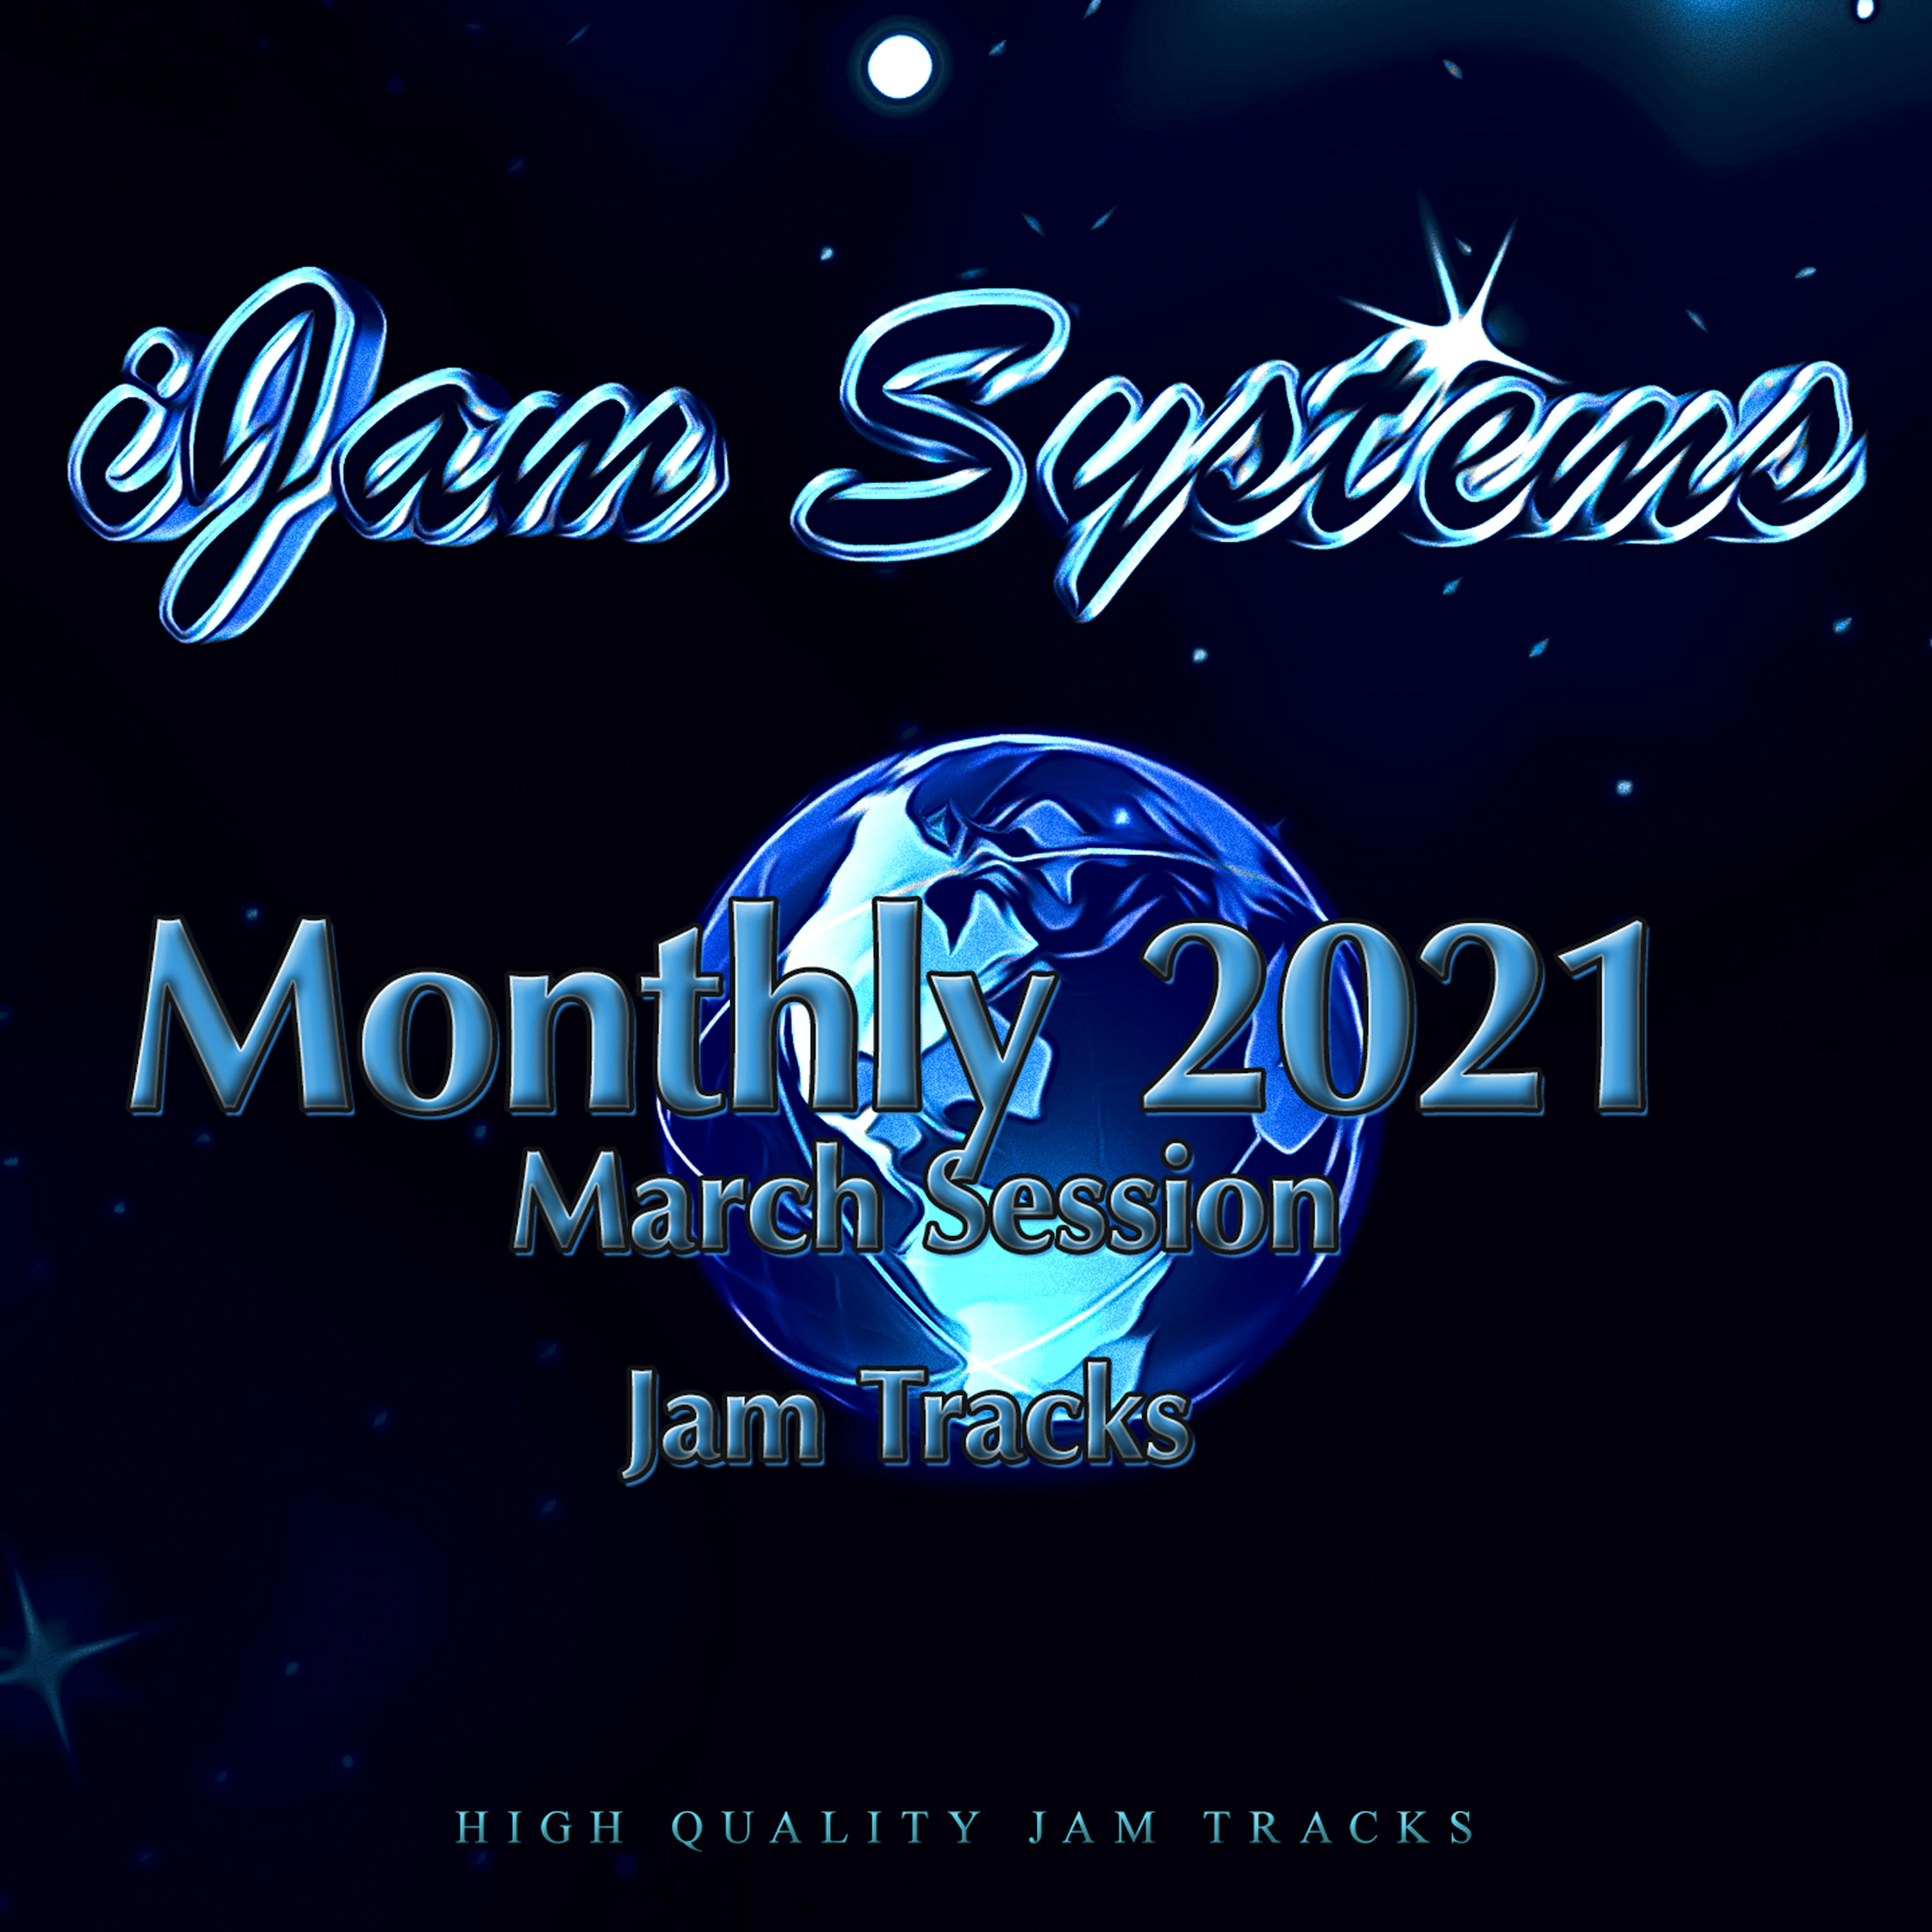 iJam Systems - Monthly 2021 - March Session (2021) [FLAC 24bit/44,1kHz]